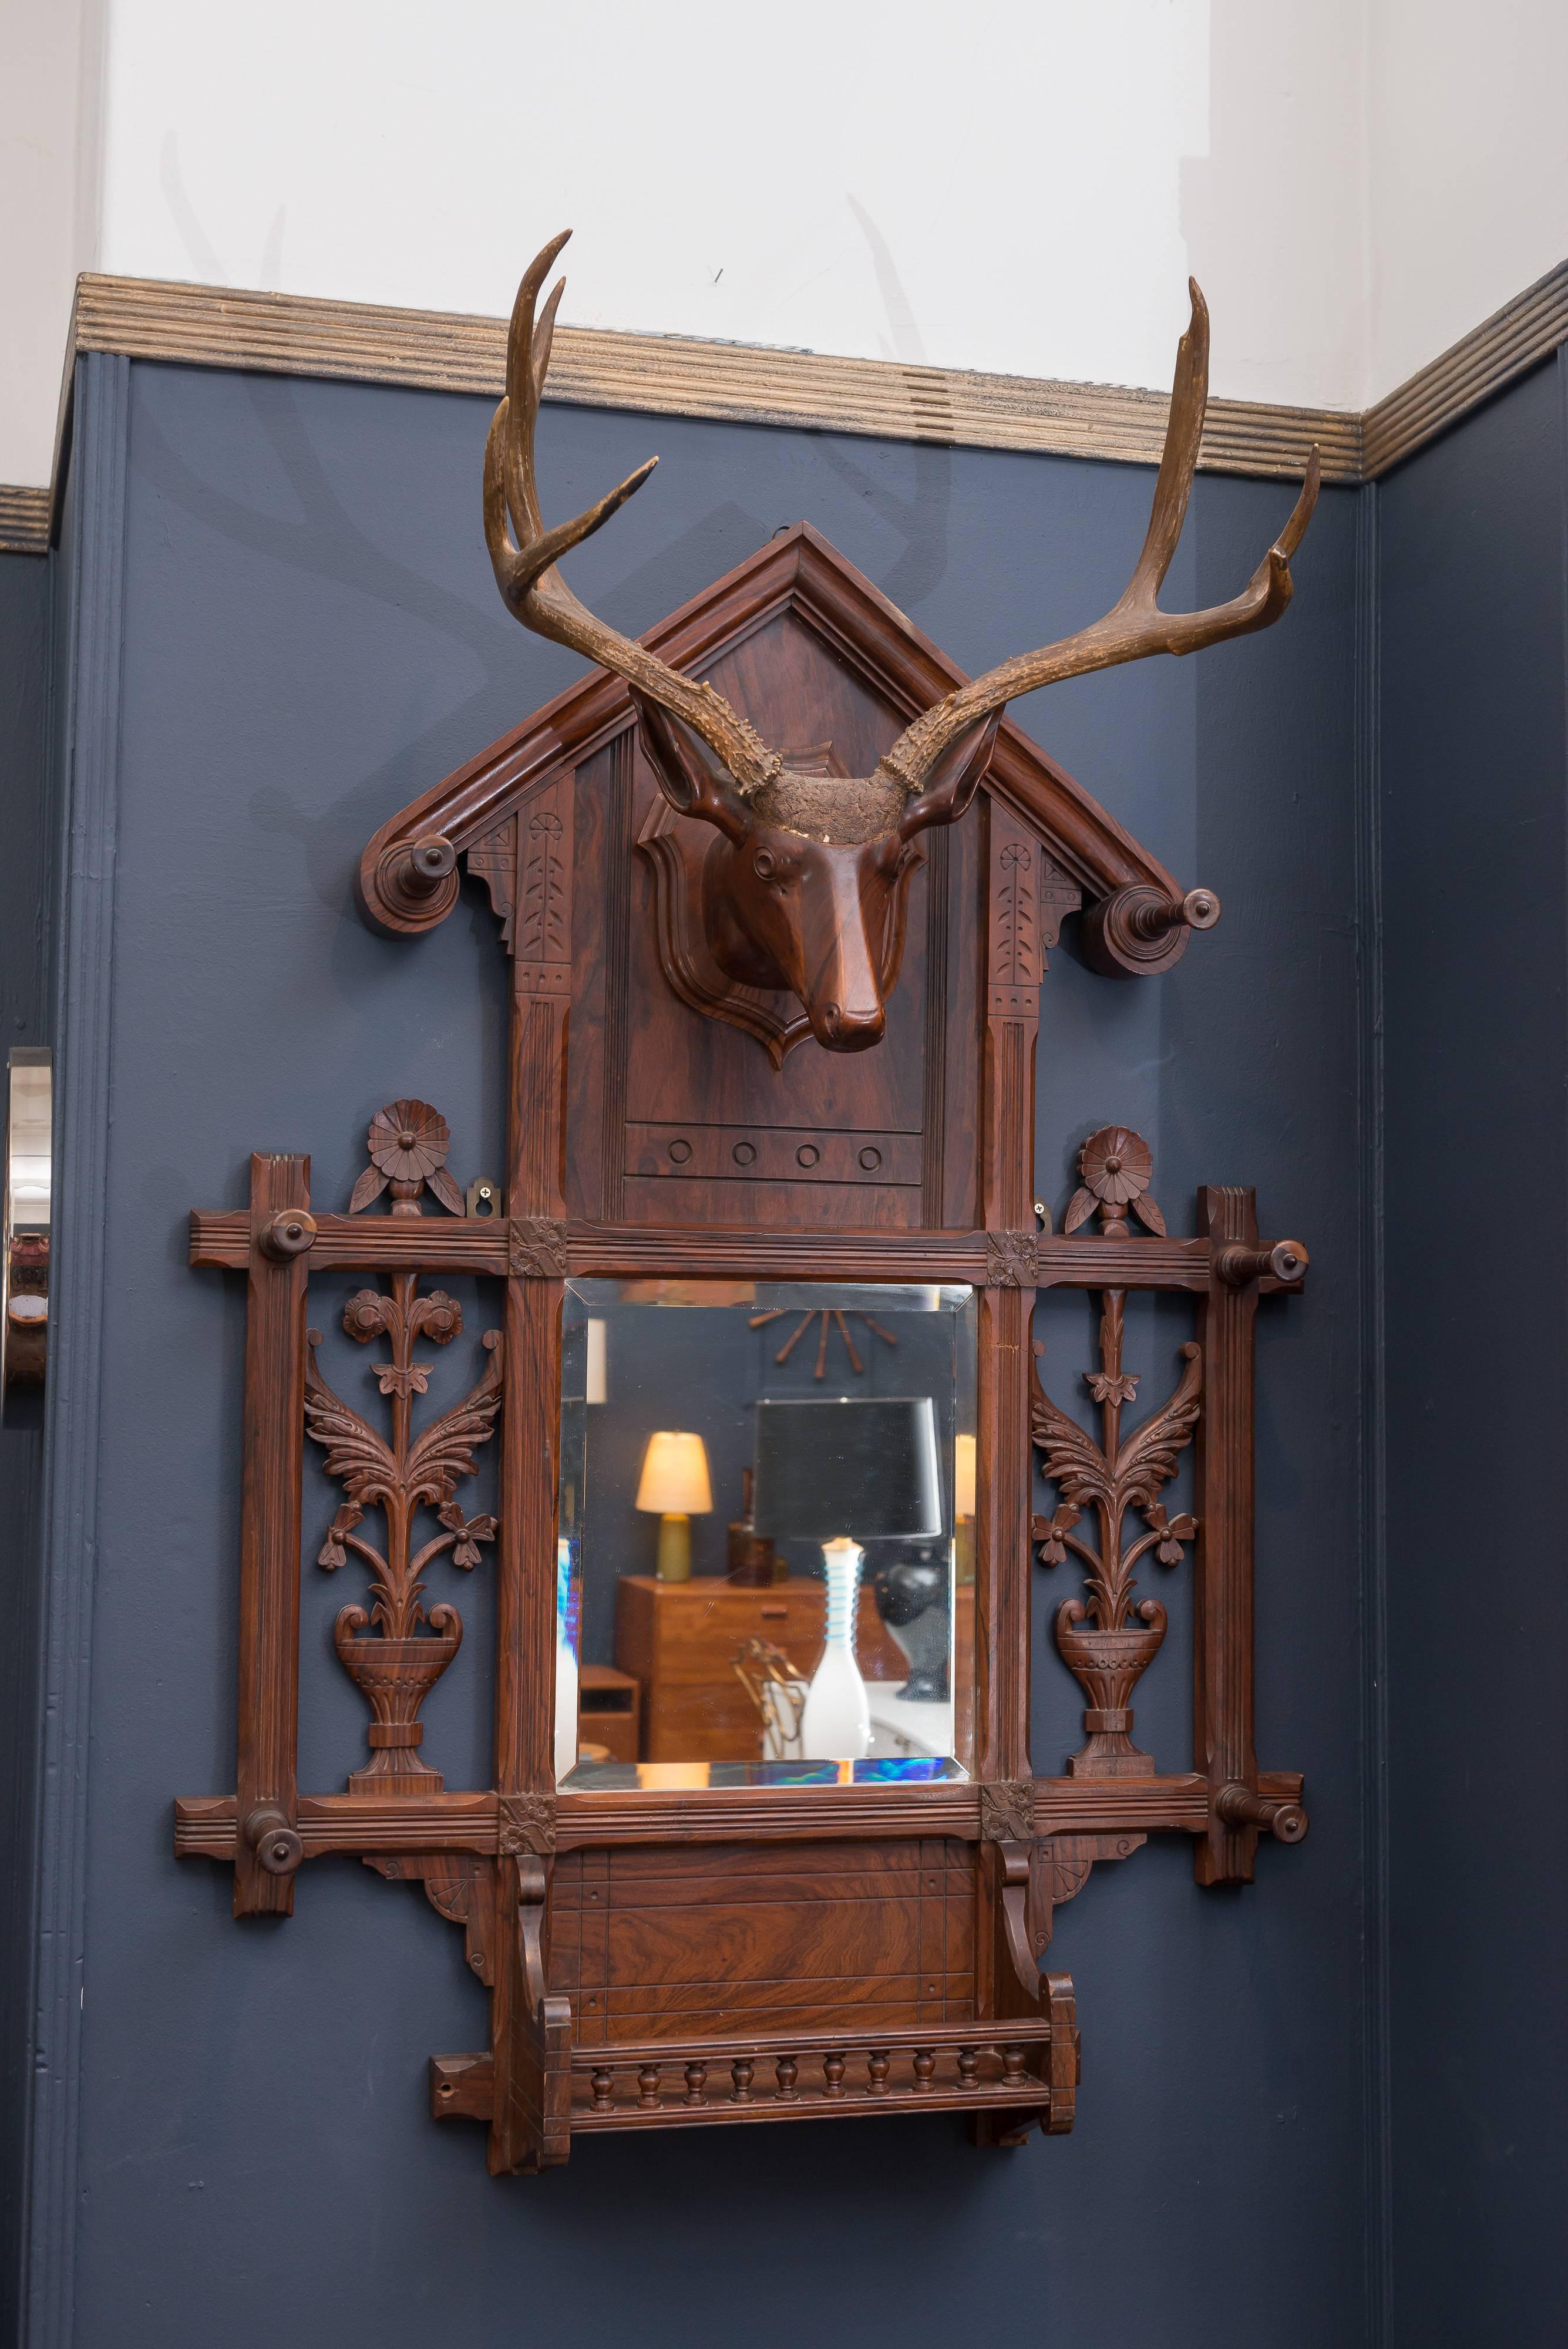 Black Forest handmade hall tree made from mahogany and rosewoods. Dramatic wooden carved deer head with antlers and floral carvings and hooks. Old repair to center of frame, original mirror plate.